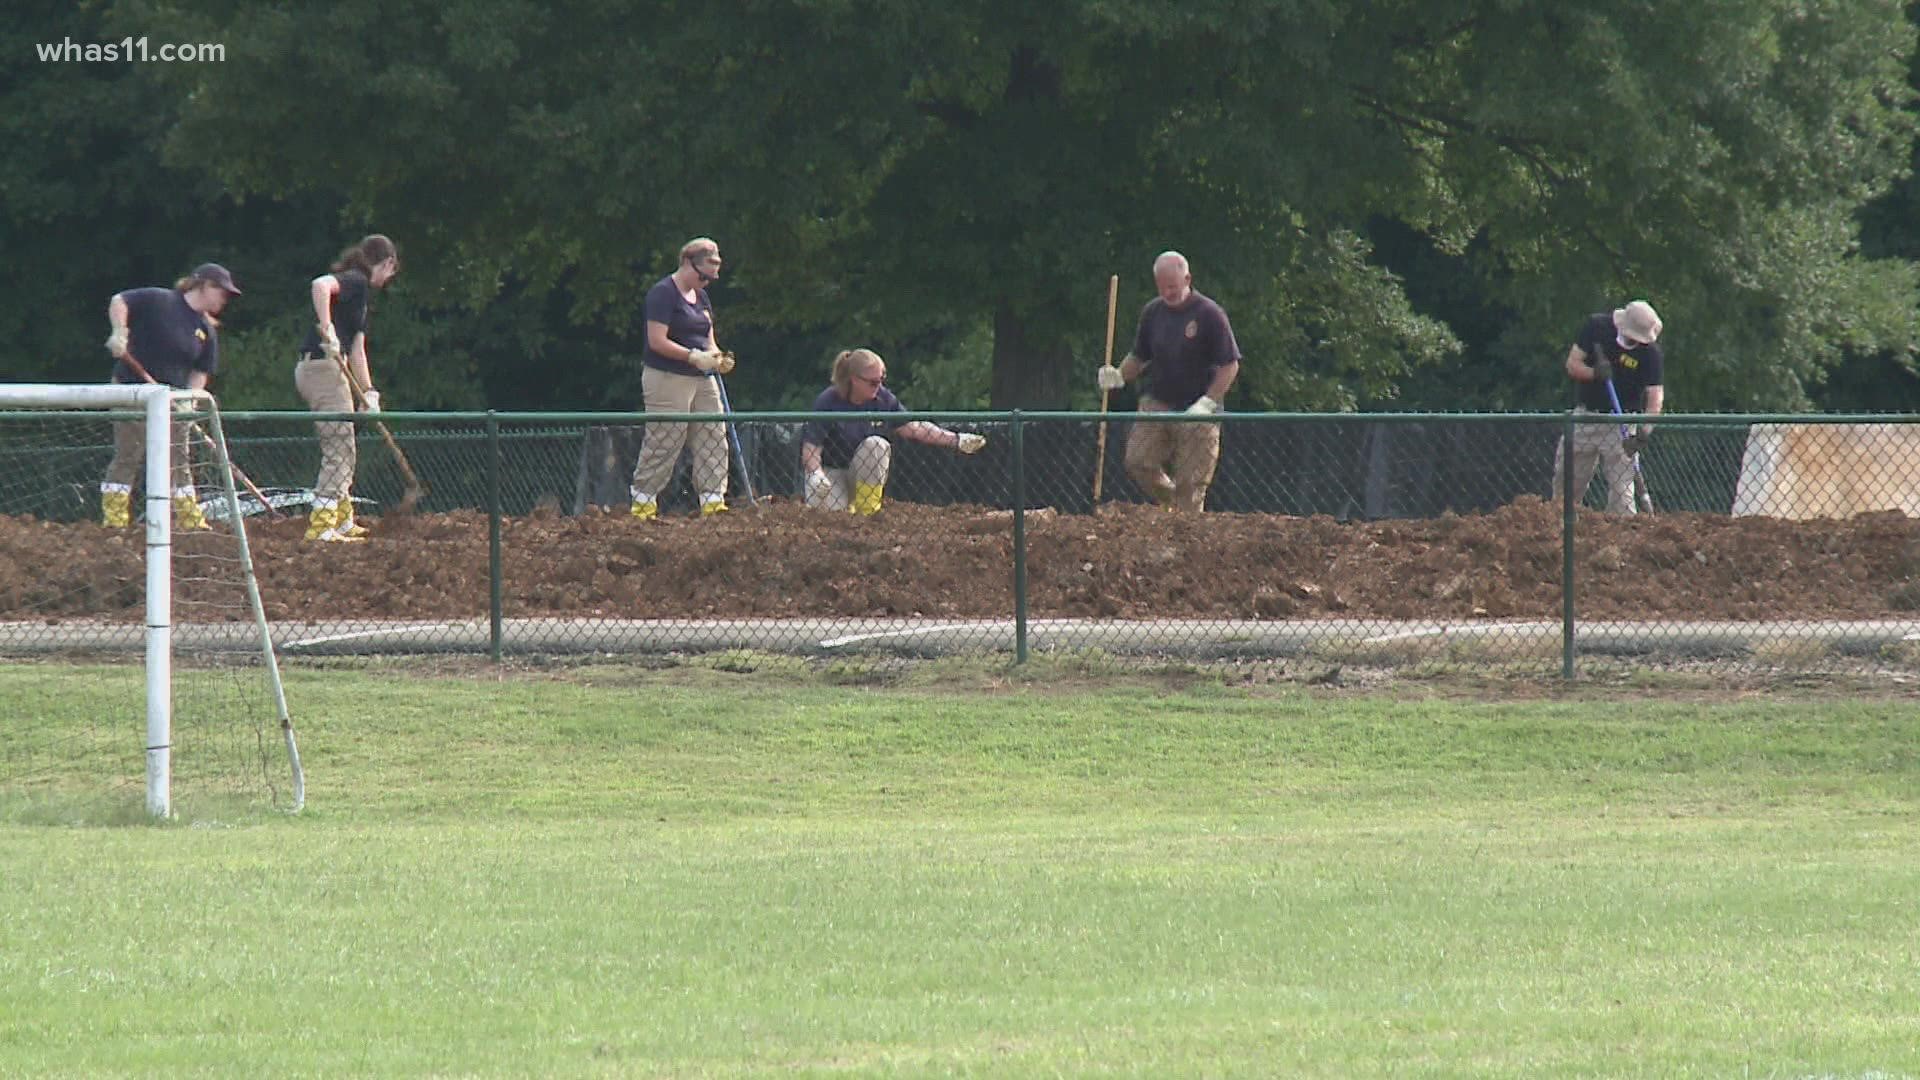 Agents were at Dean Watt's Park in Bardstown on Saturday, continuing their investigation into the disappearance of Crystal Rogers.